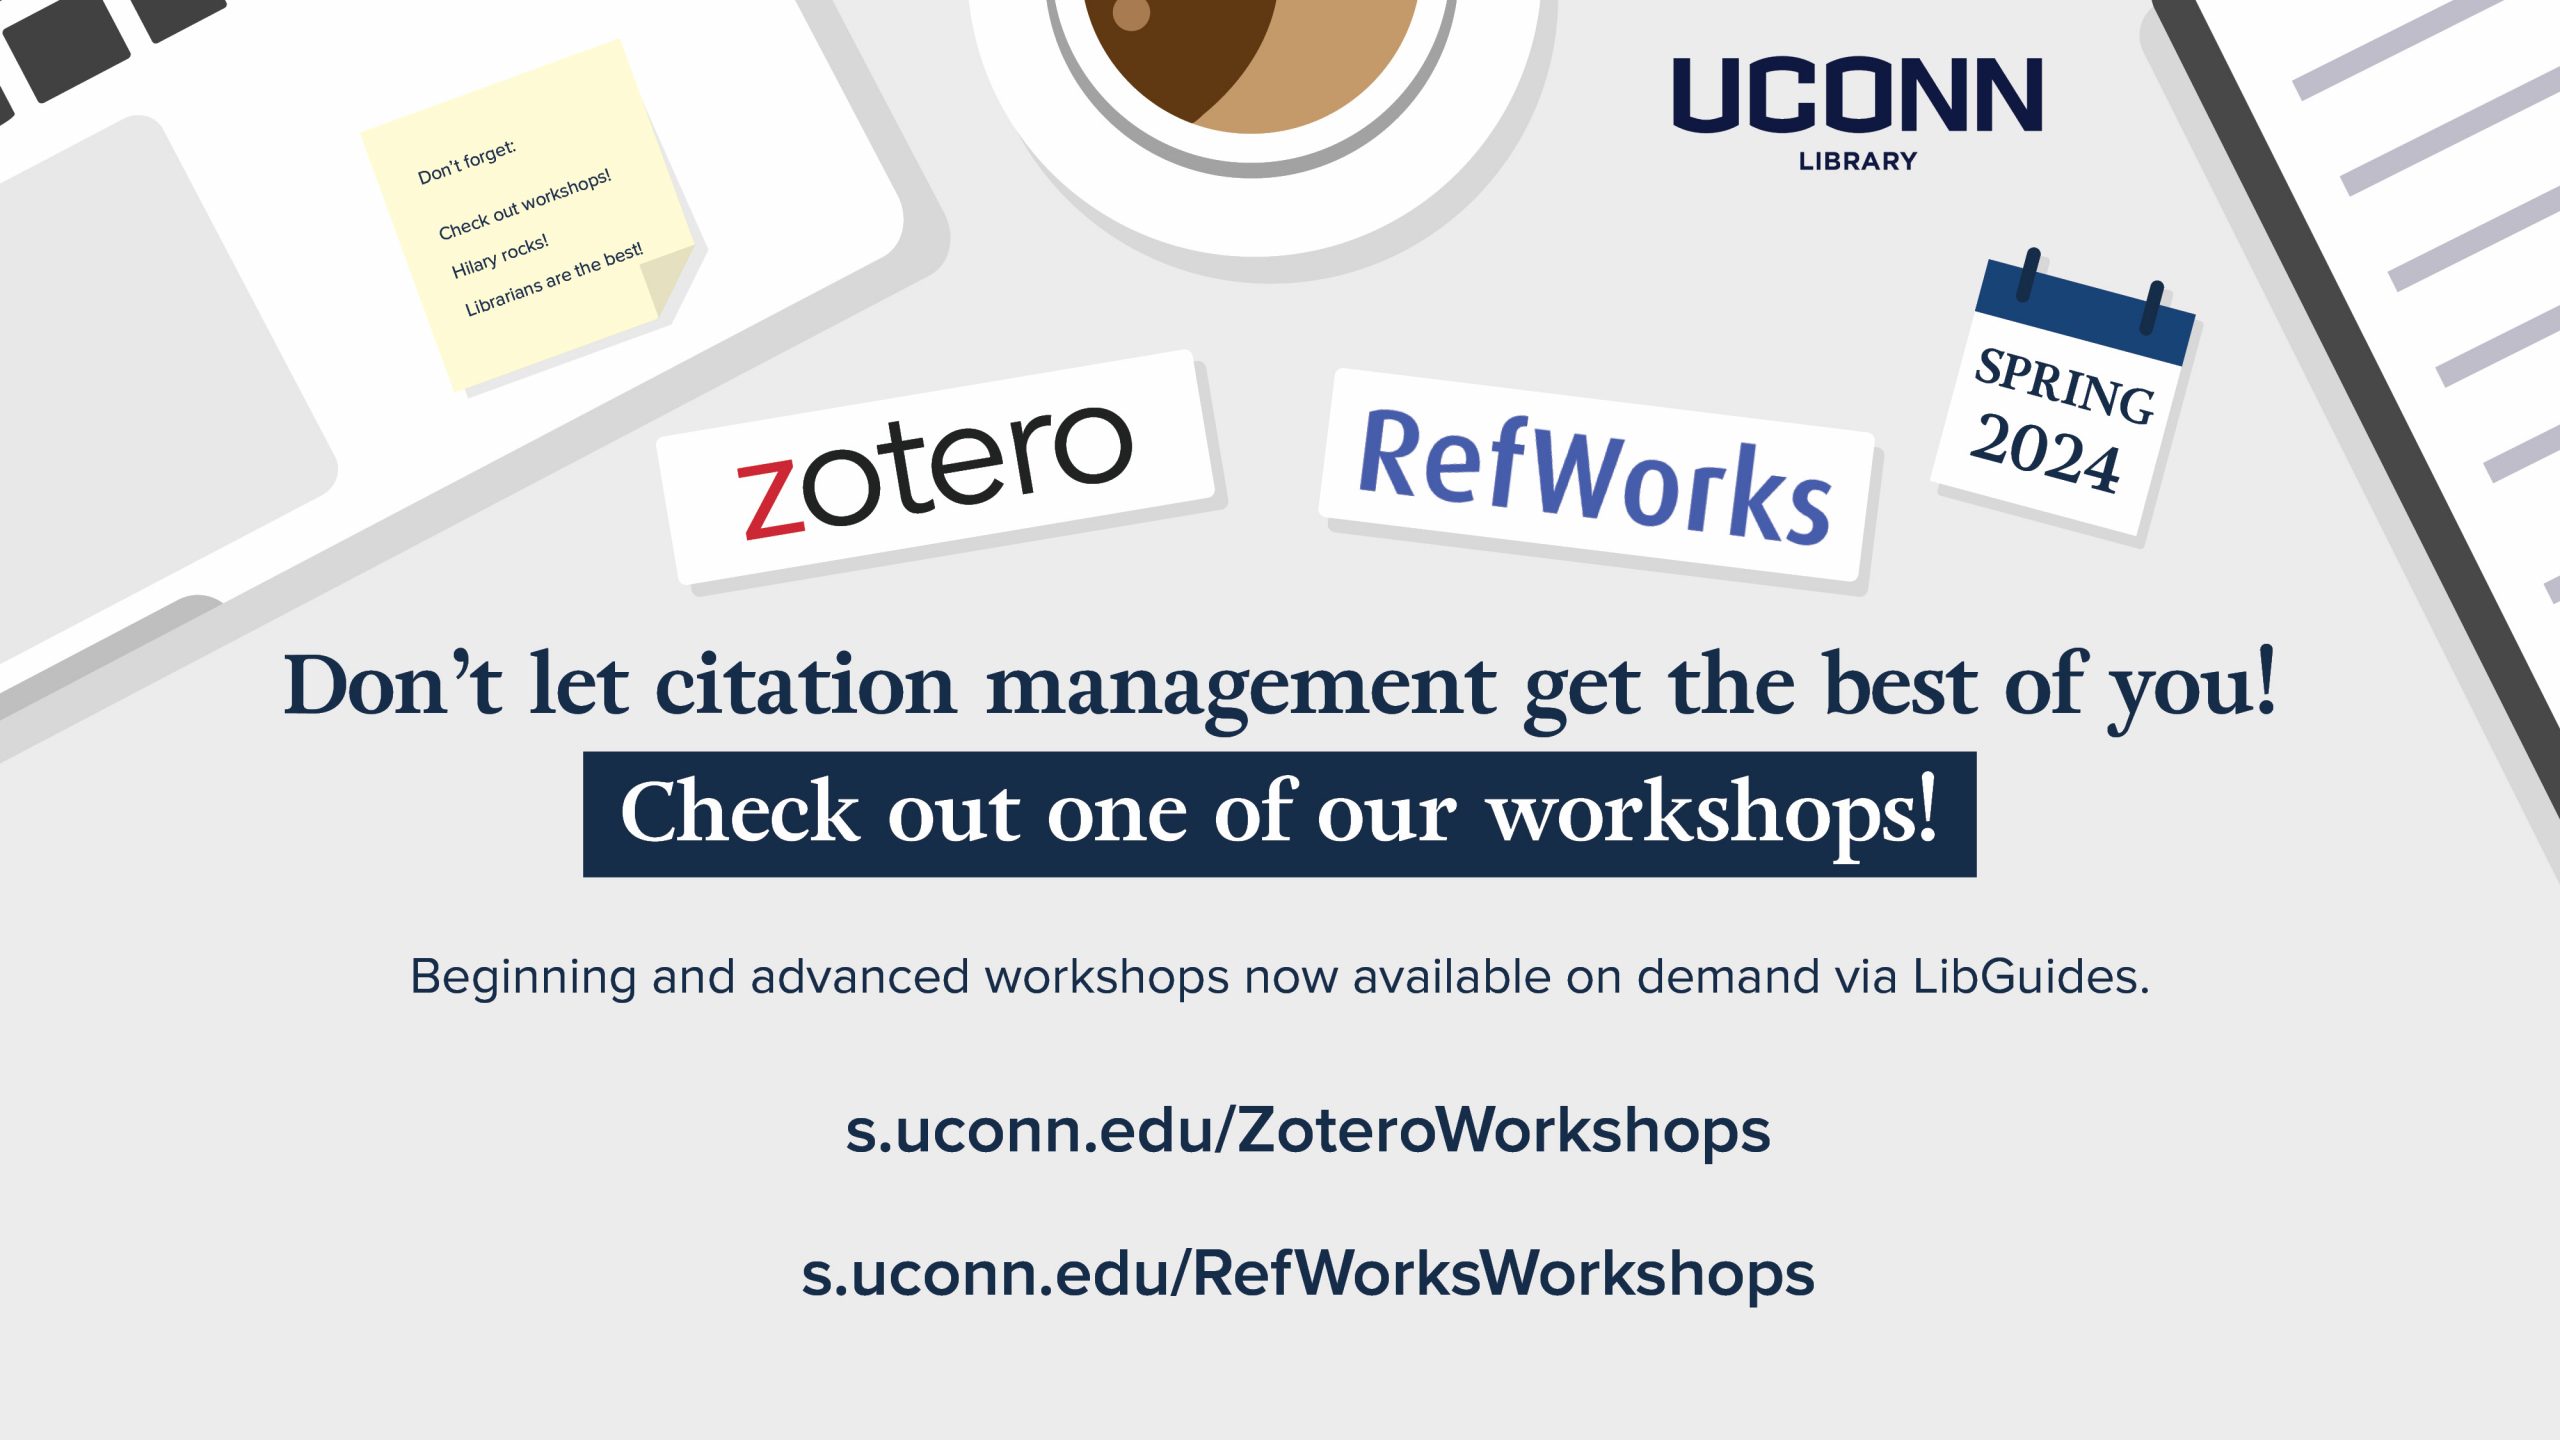 Don't let citation management get the best of you! Our Zotero and RefWorks workshops are now available on-demand for new and advanced users. Visit s.uconn.edu/ZoteroWorkshops or s.uconn.edu/RefWorksWorkshops